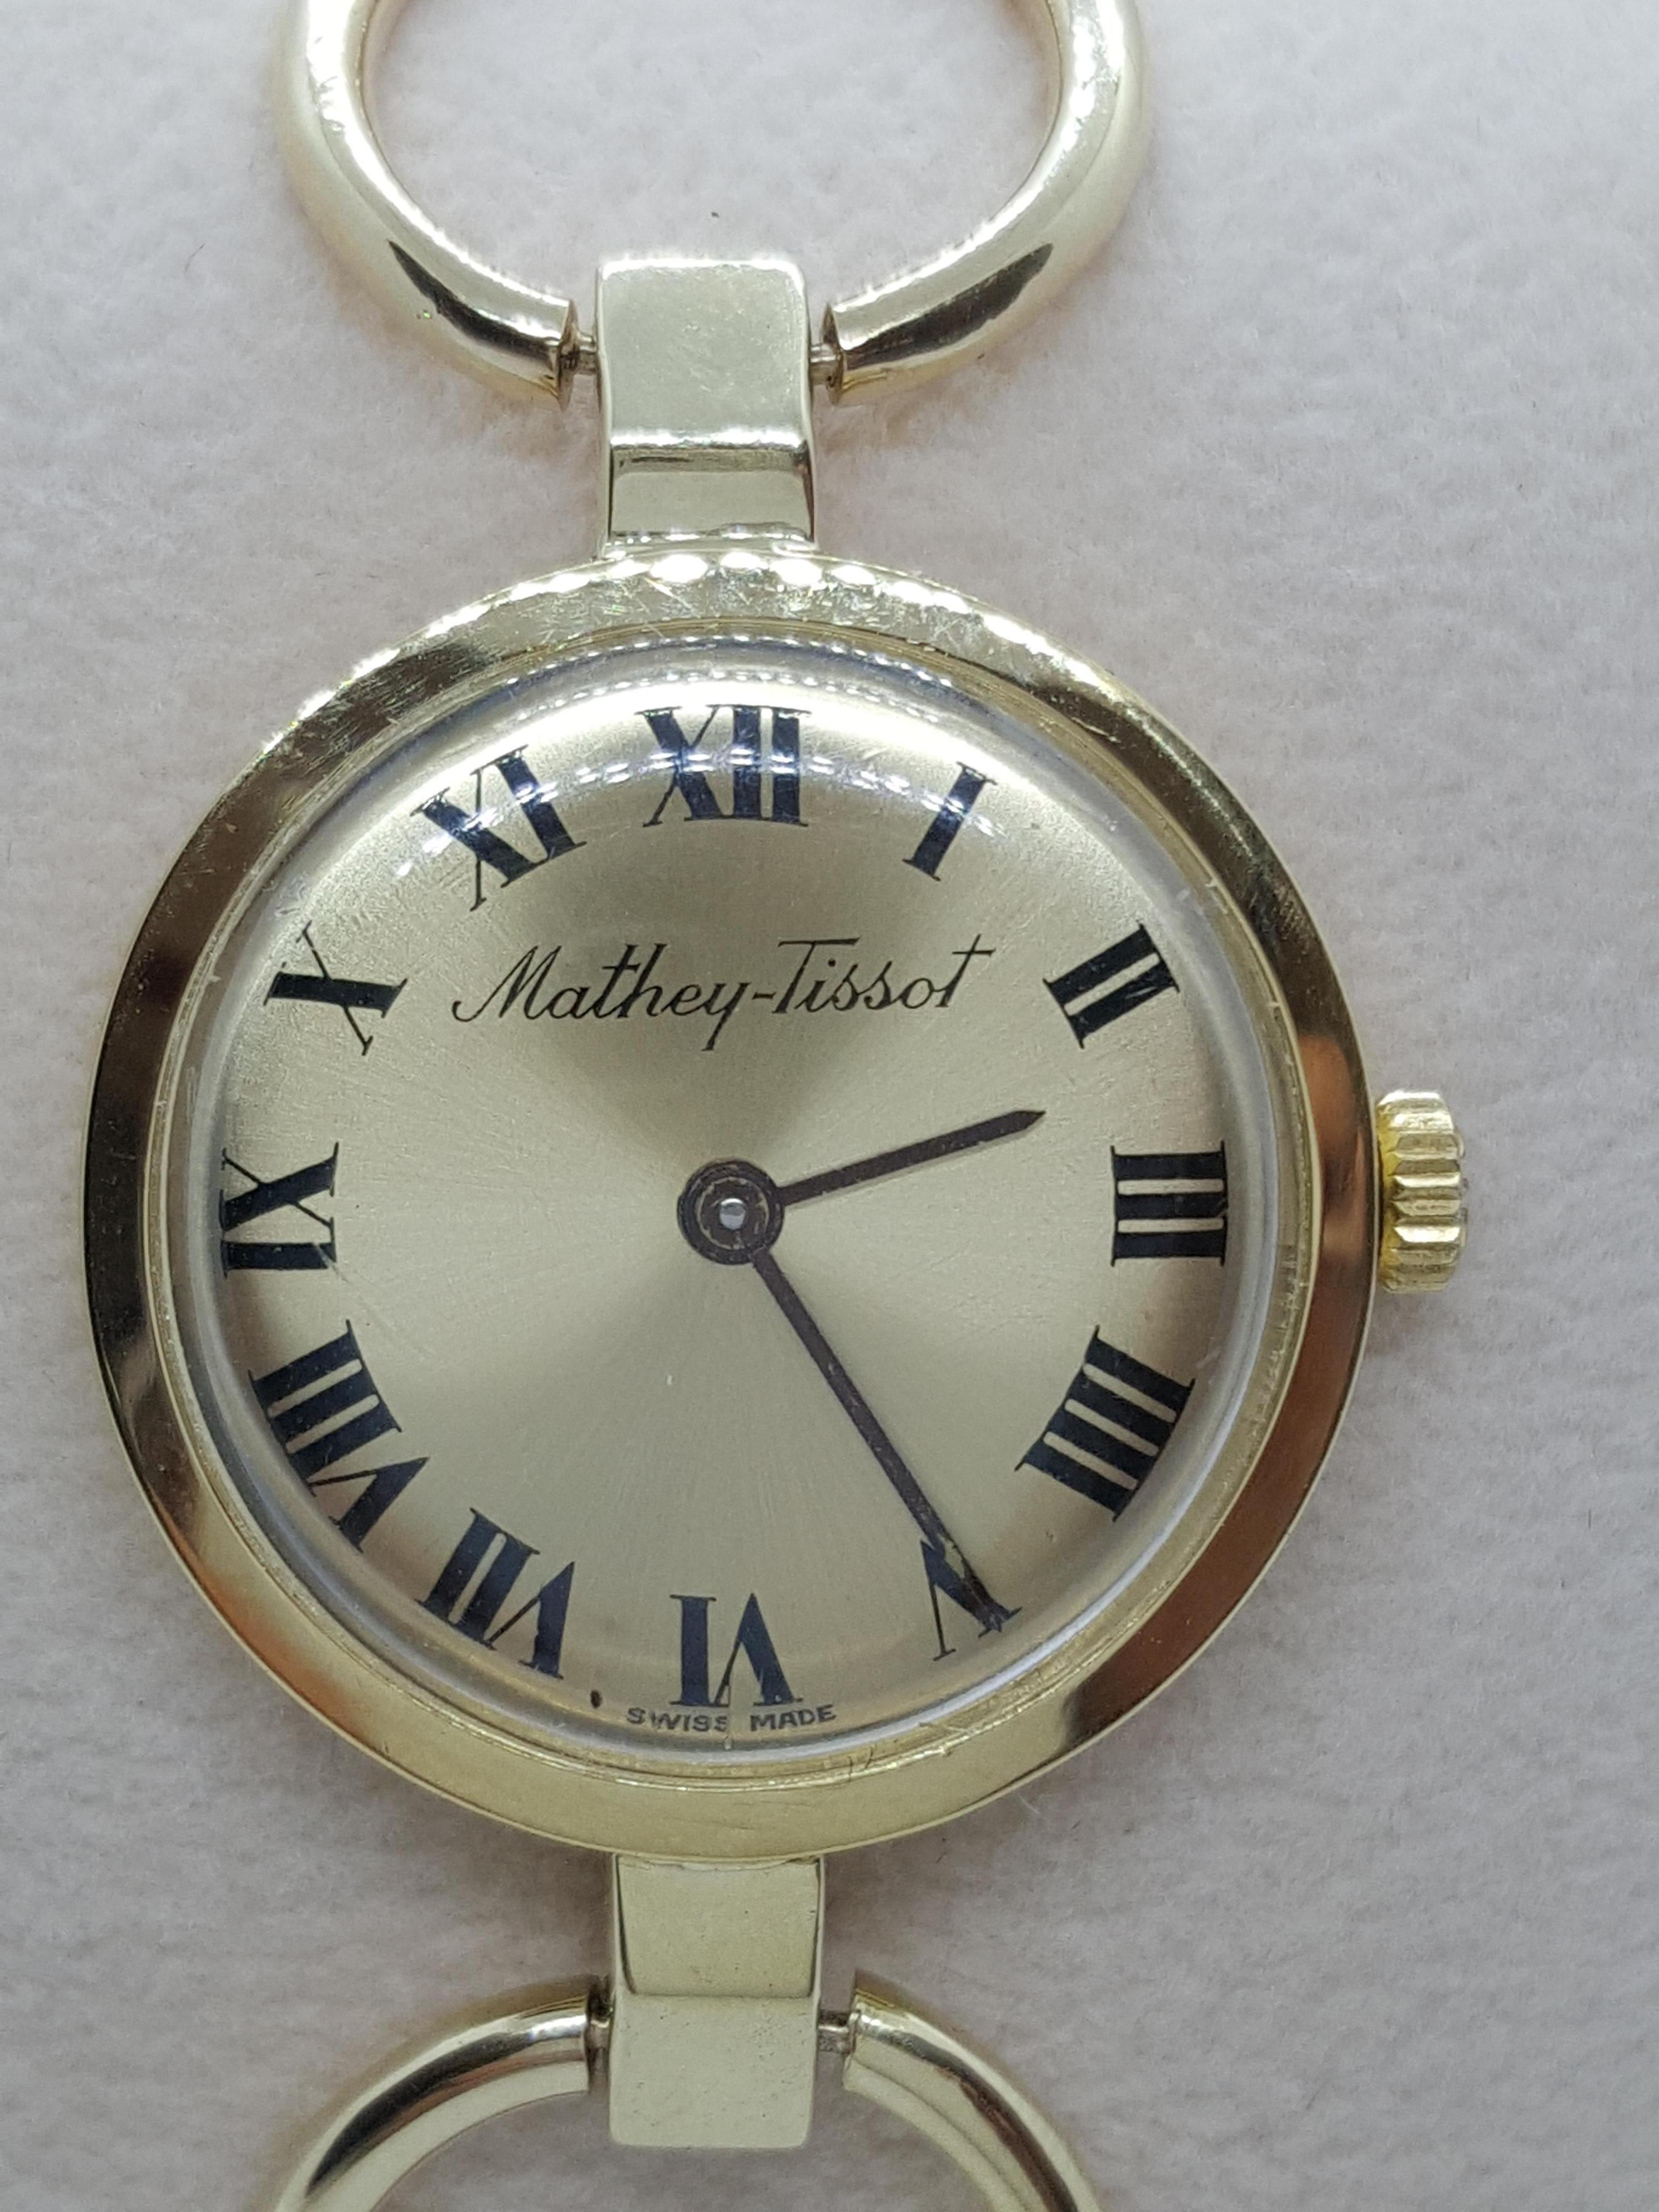 Beautiful ladies 18kt yellow gold Mathey-Tissot watch with a 25mm case (7mm thick), gold face with black Roman numerals, manual wind, and Swiss-made (note: the case is 18kt yellow gold and the bracelet is 14kt yellow gold). The style number for this